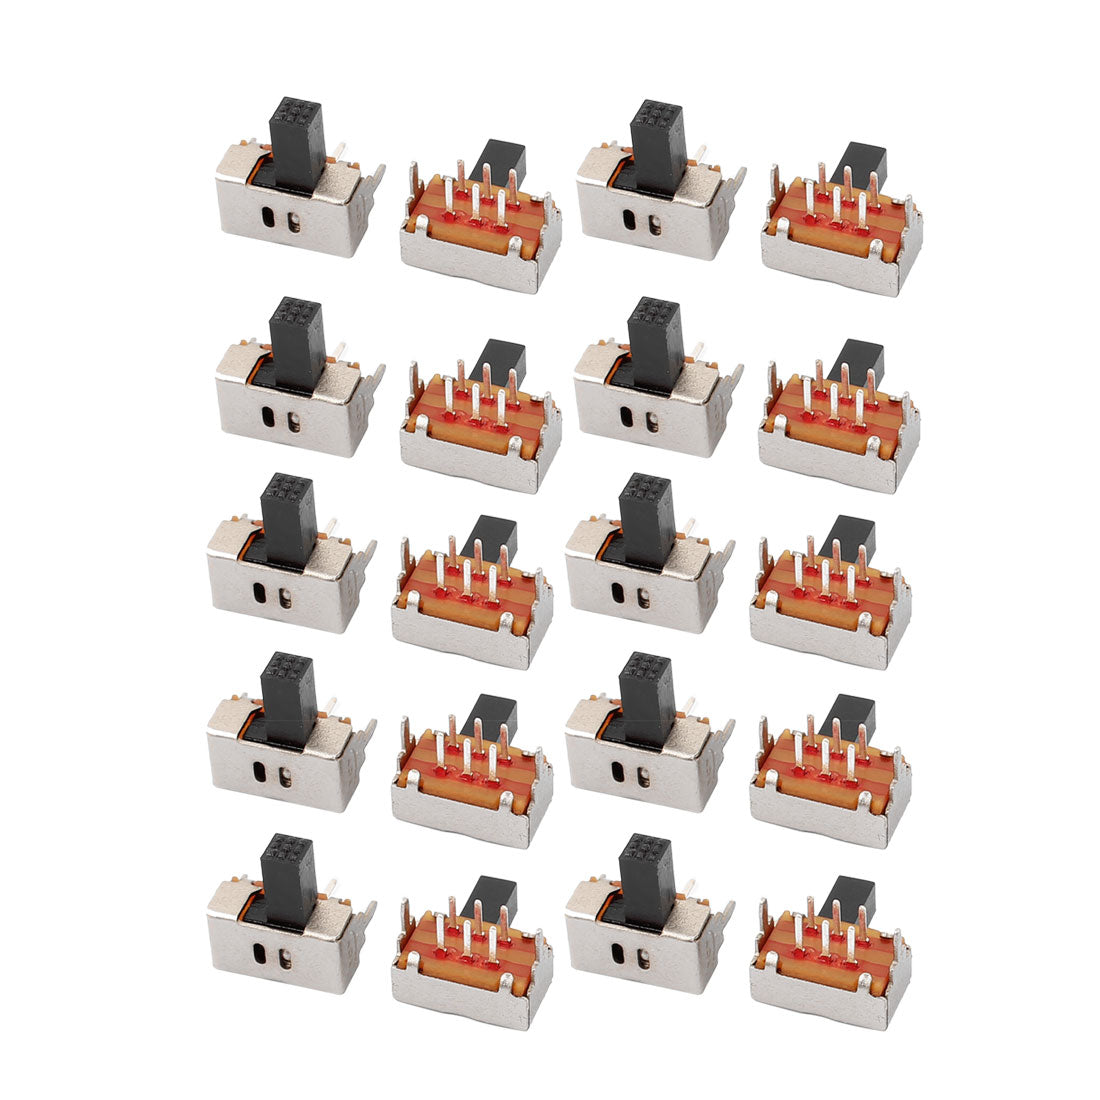 uxcell Uxcell 20Pcs 2 Position 6P DPDT Panel Mount Micro Slide Switch Latching Power Switch